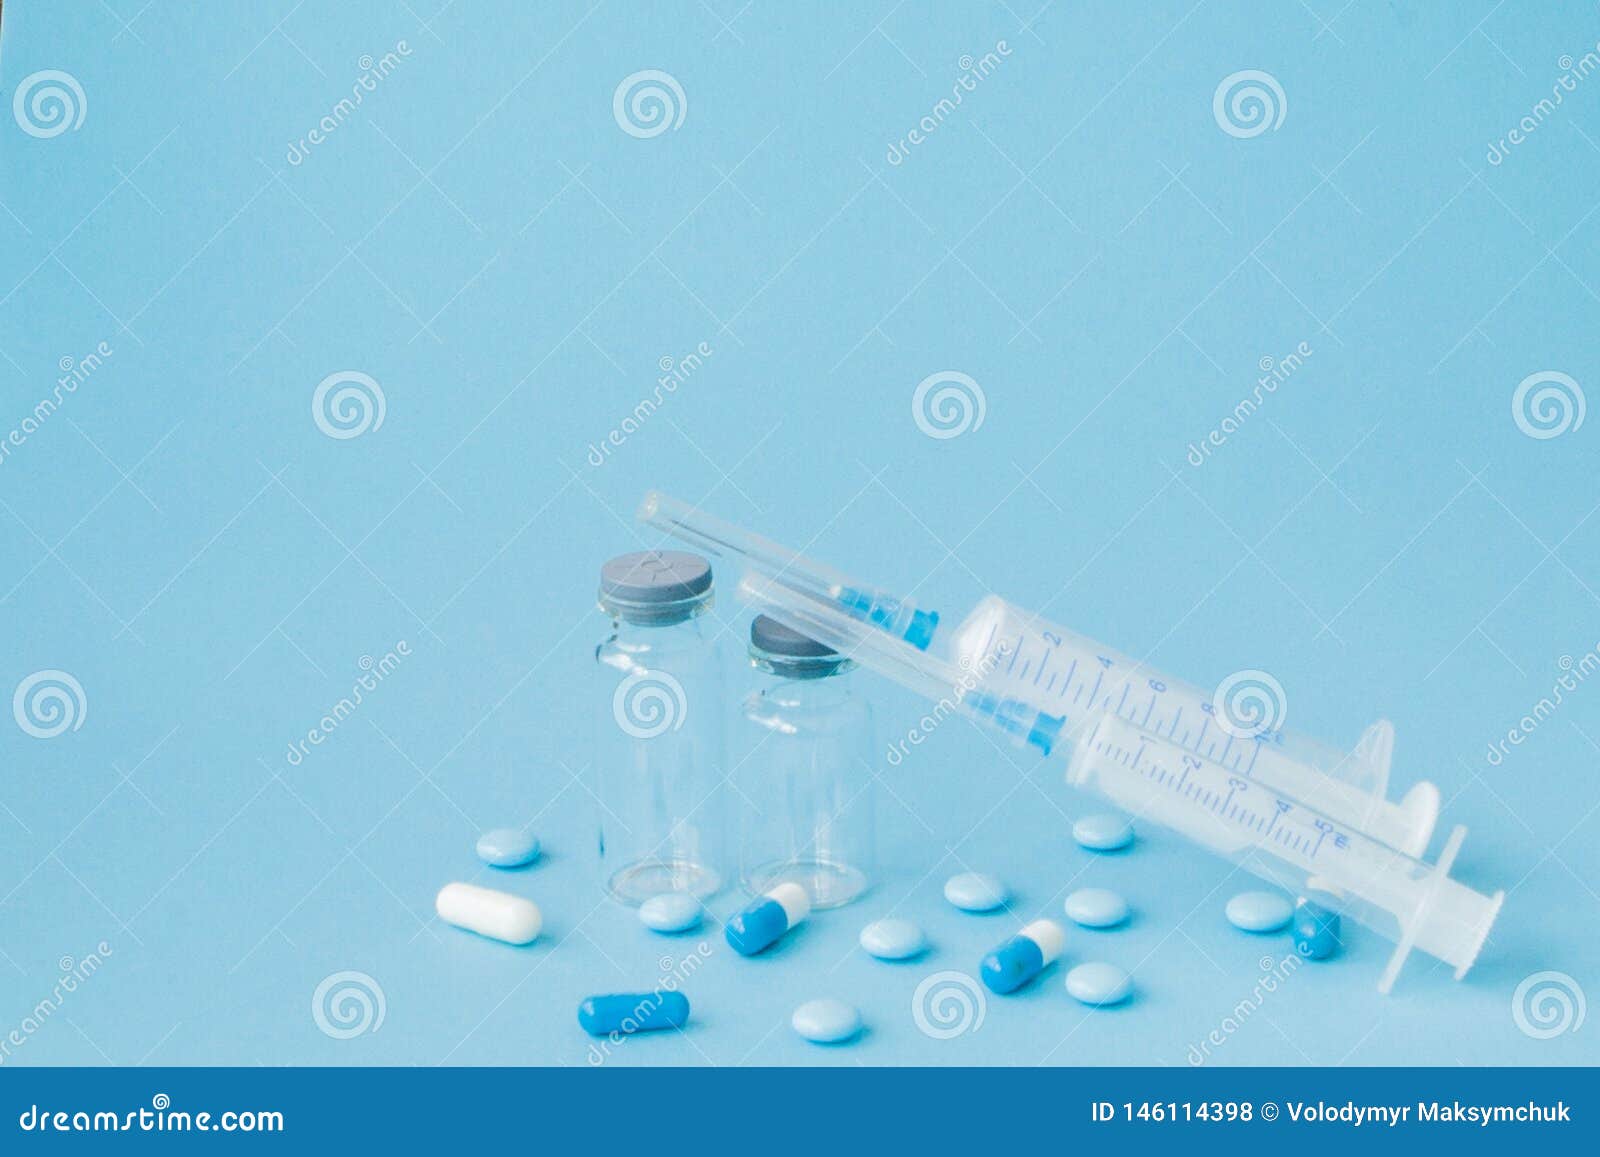 Pills and Medical Injection on Blue Background. Creative Idea for